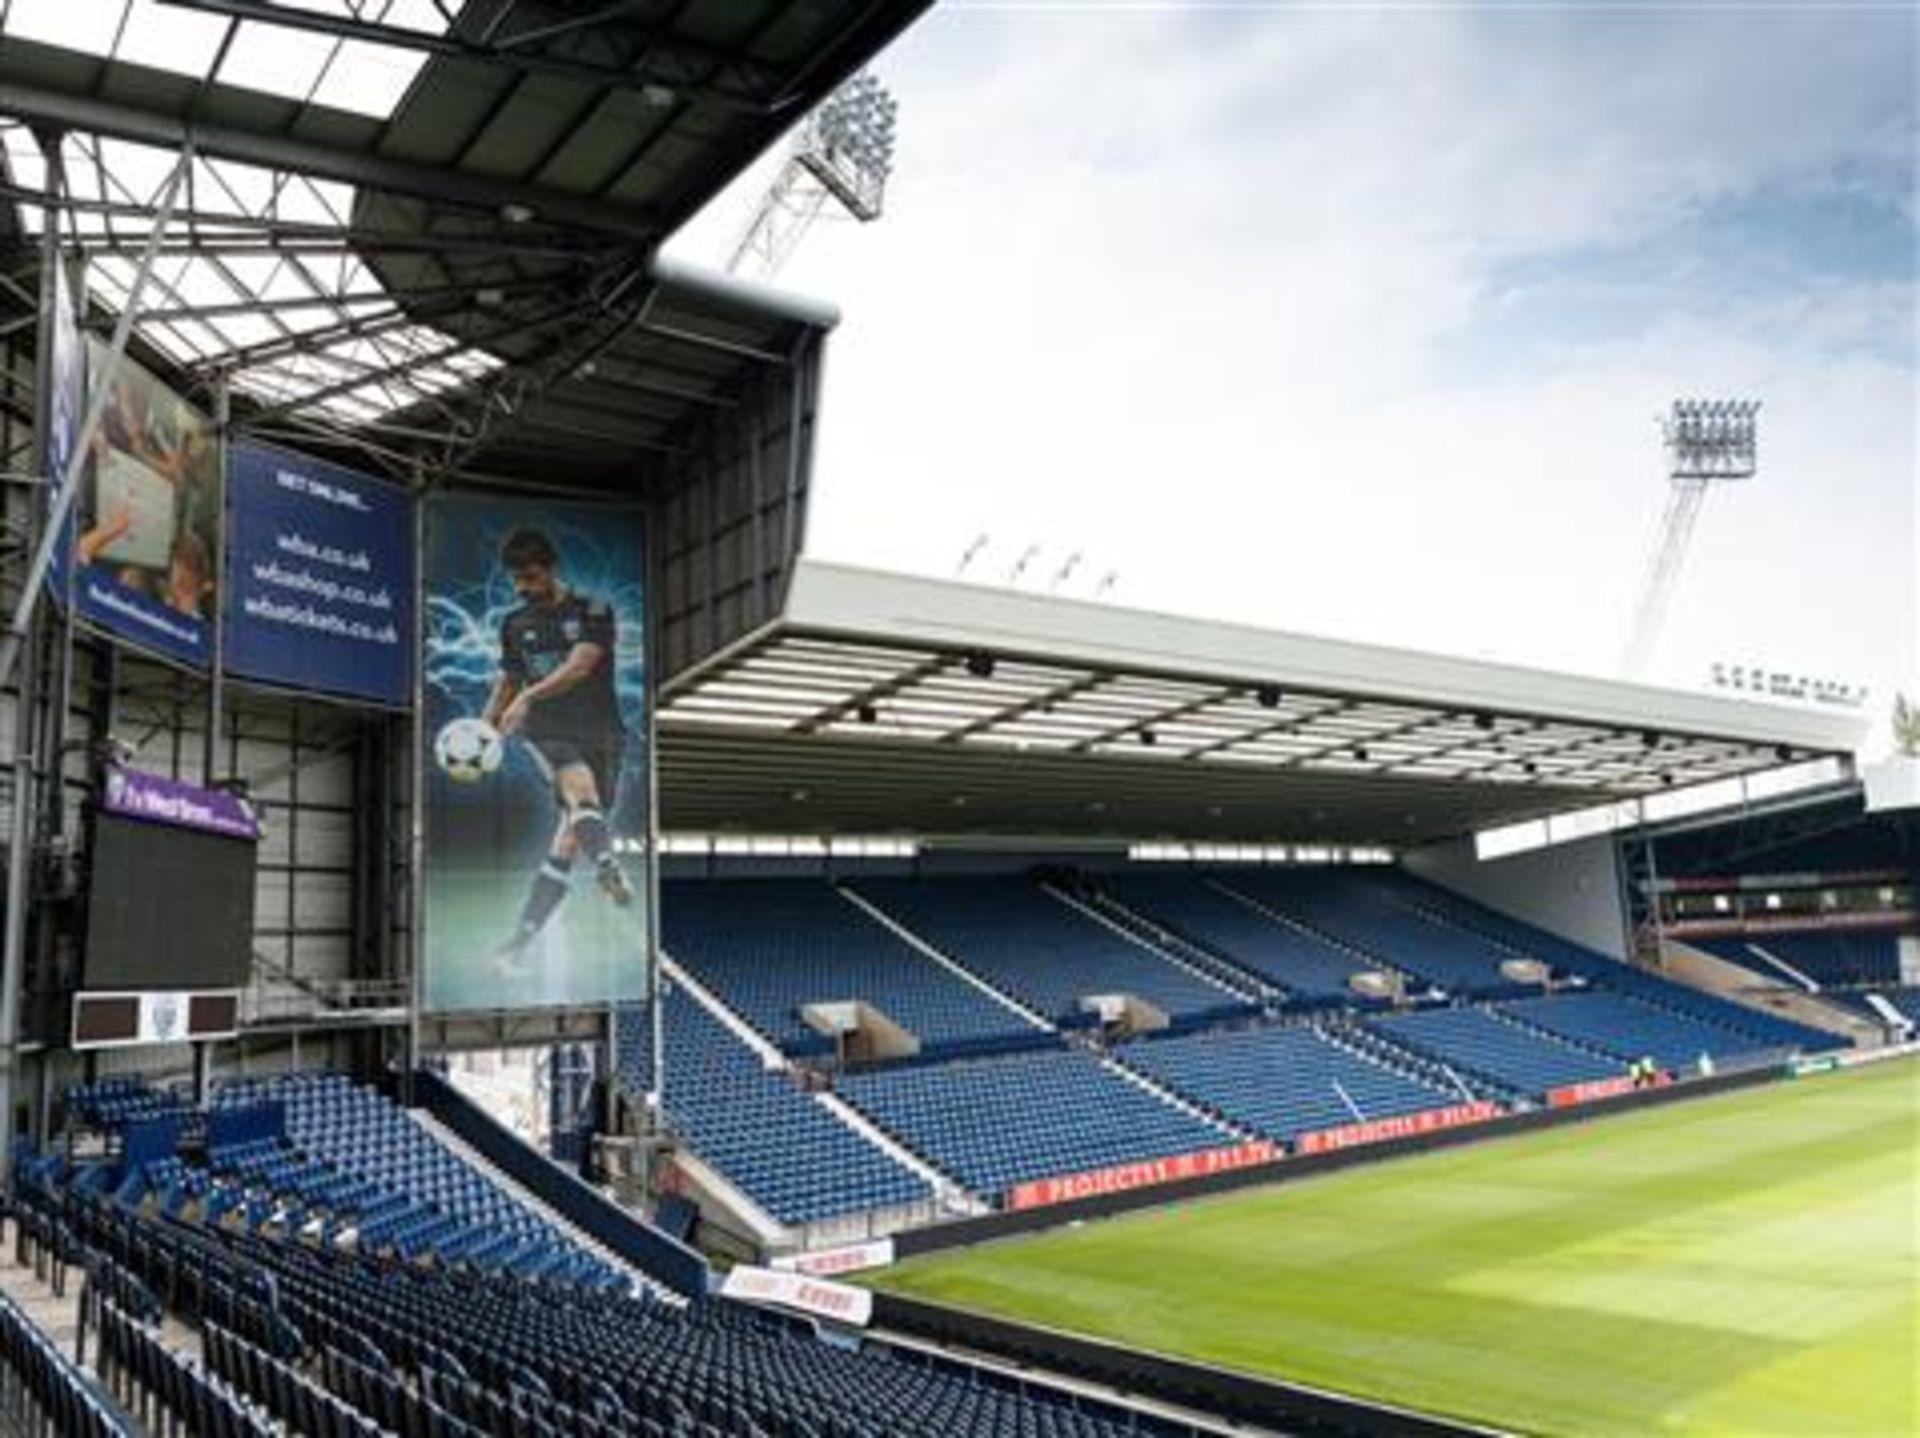 West Bromwich Albion v Manchester United Premier League match two VIP hospitality tickets - Image 2 of 3